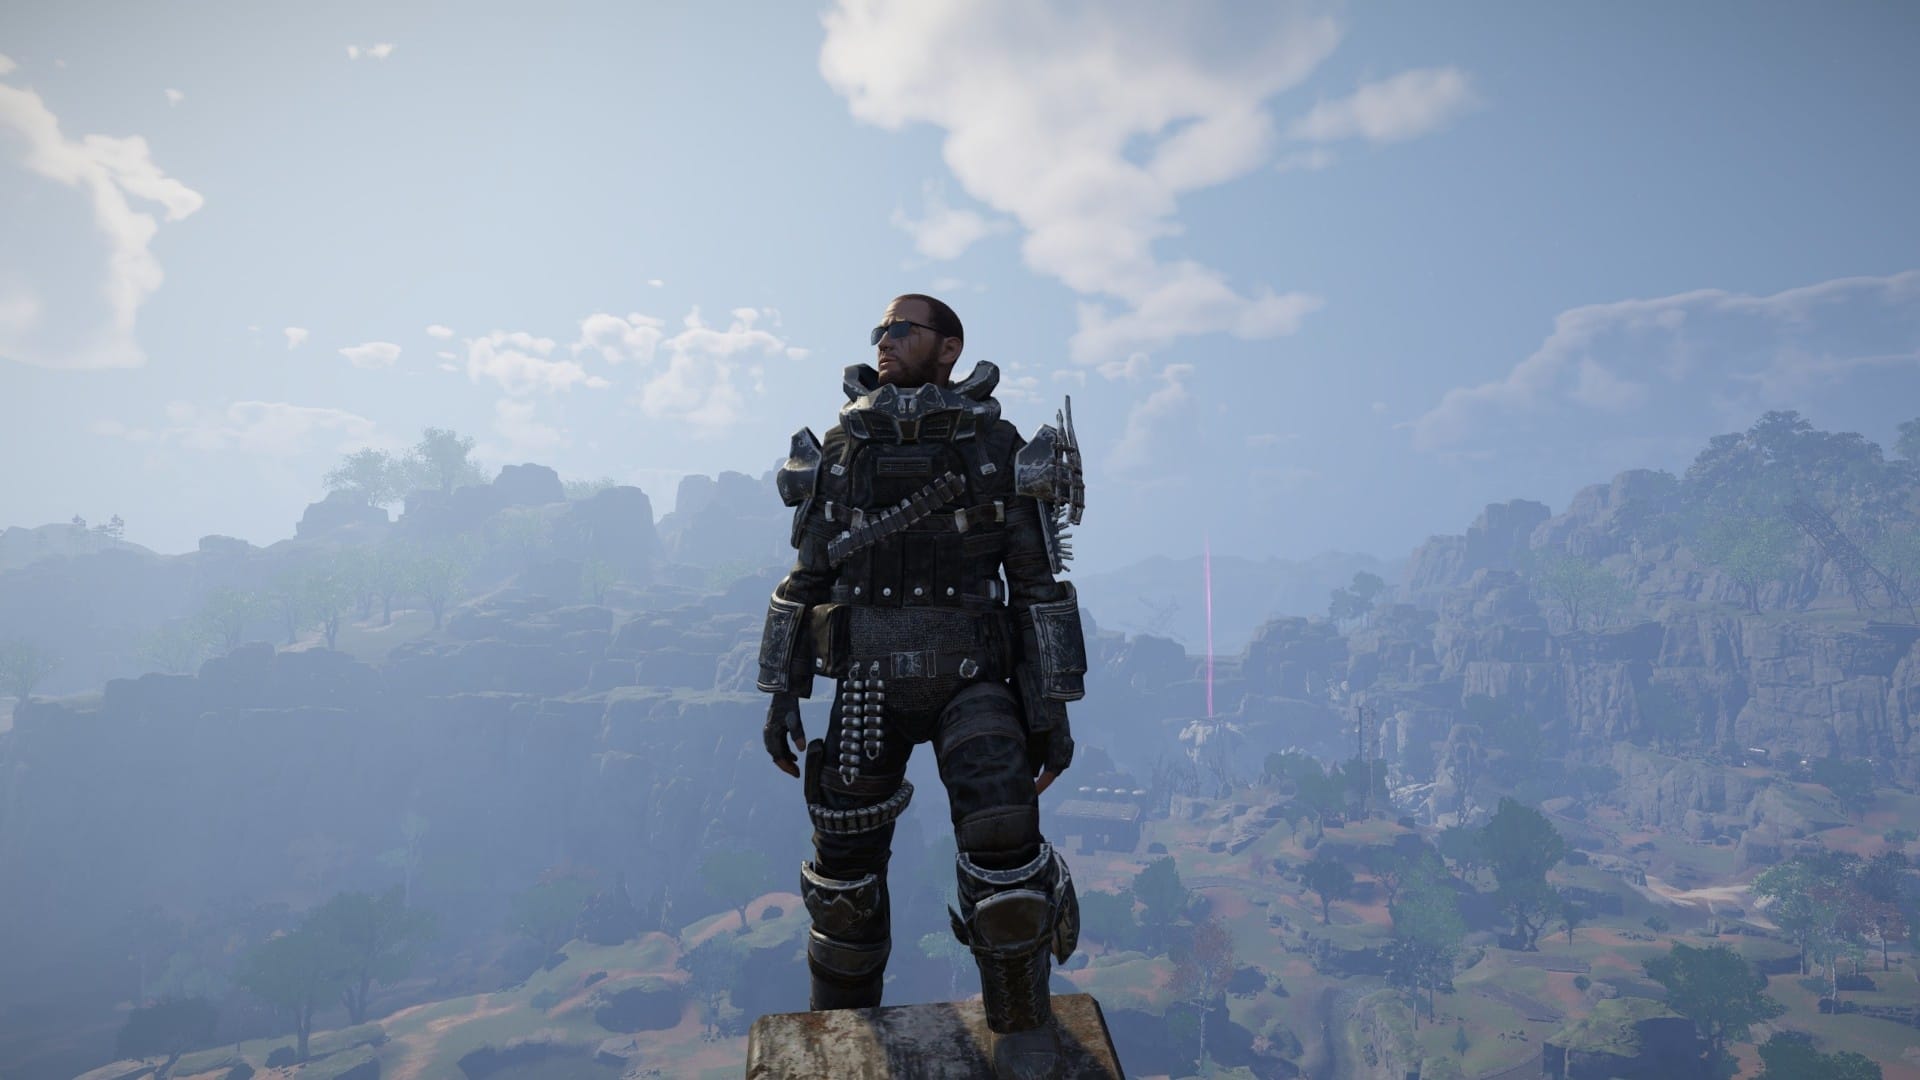 With a well-built jetpack, even reaching the loftiest heights is no longer a problem.